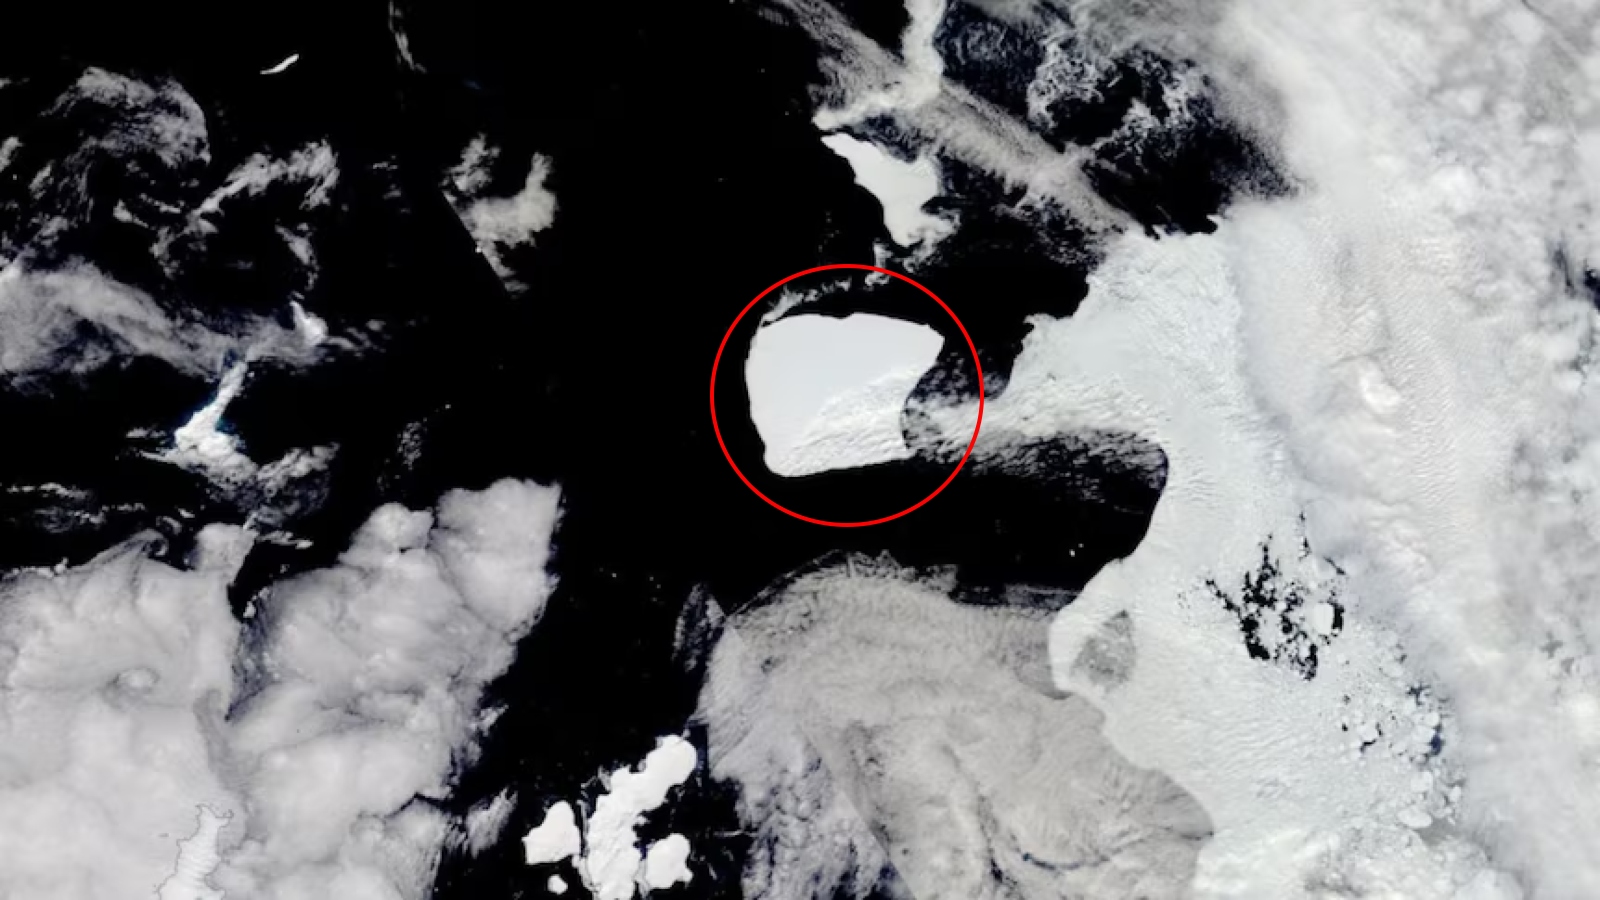 World’s biggest iceberg 3 times the size of New York City is finally escaping Antarctica after being trapped for almost 40 years